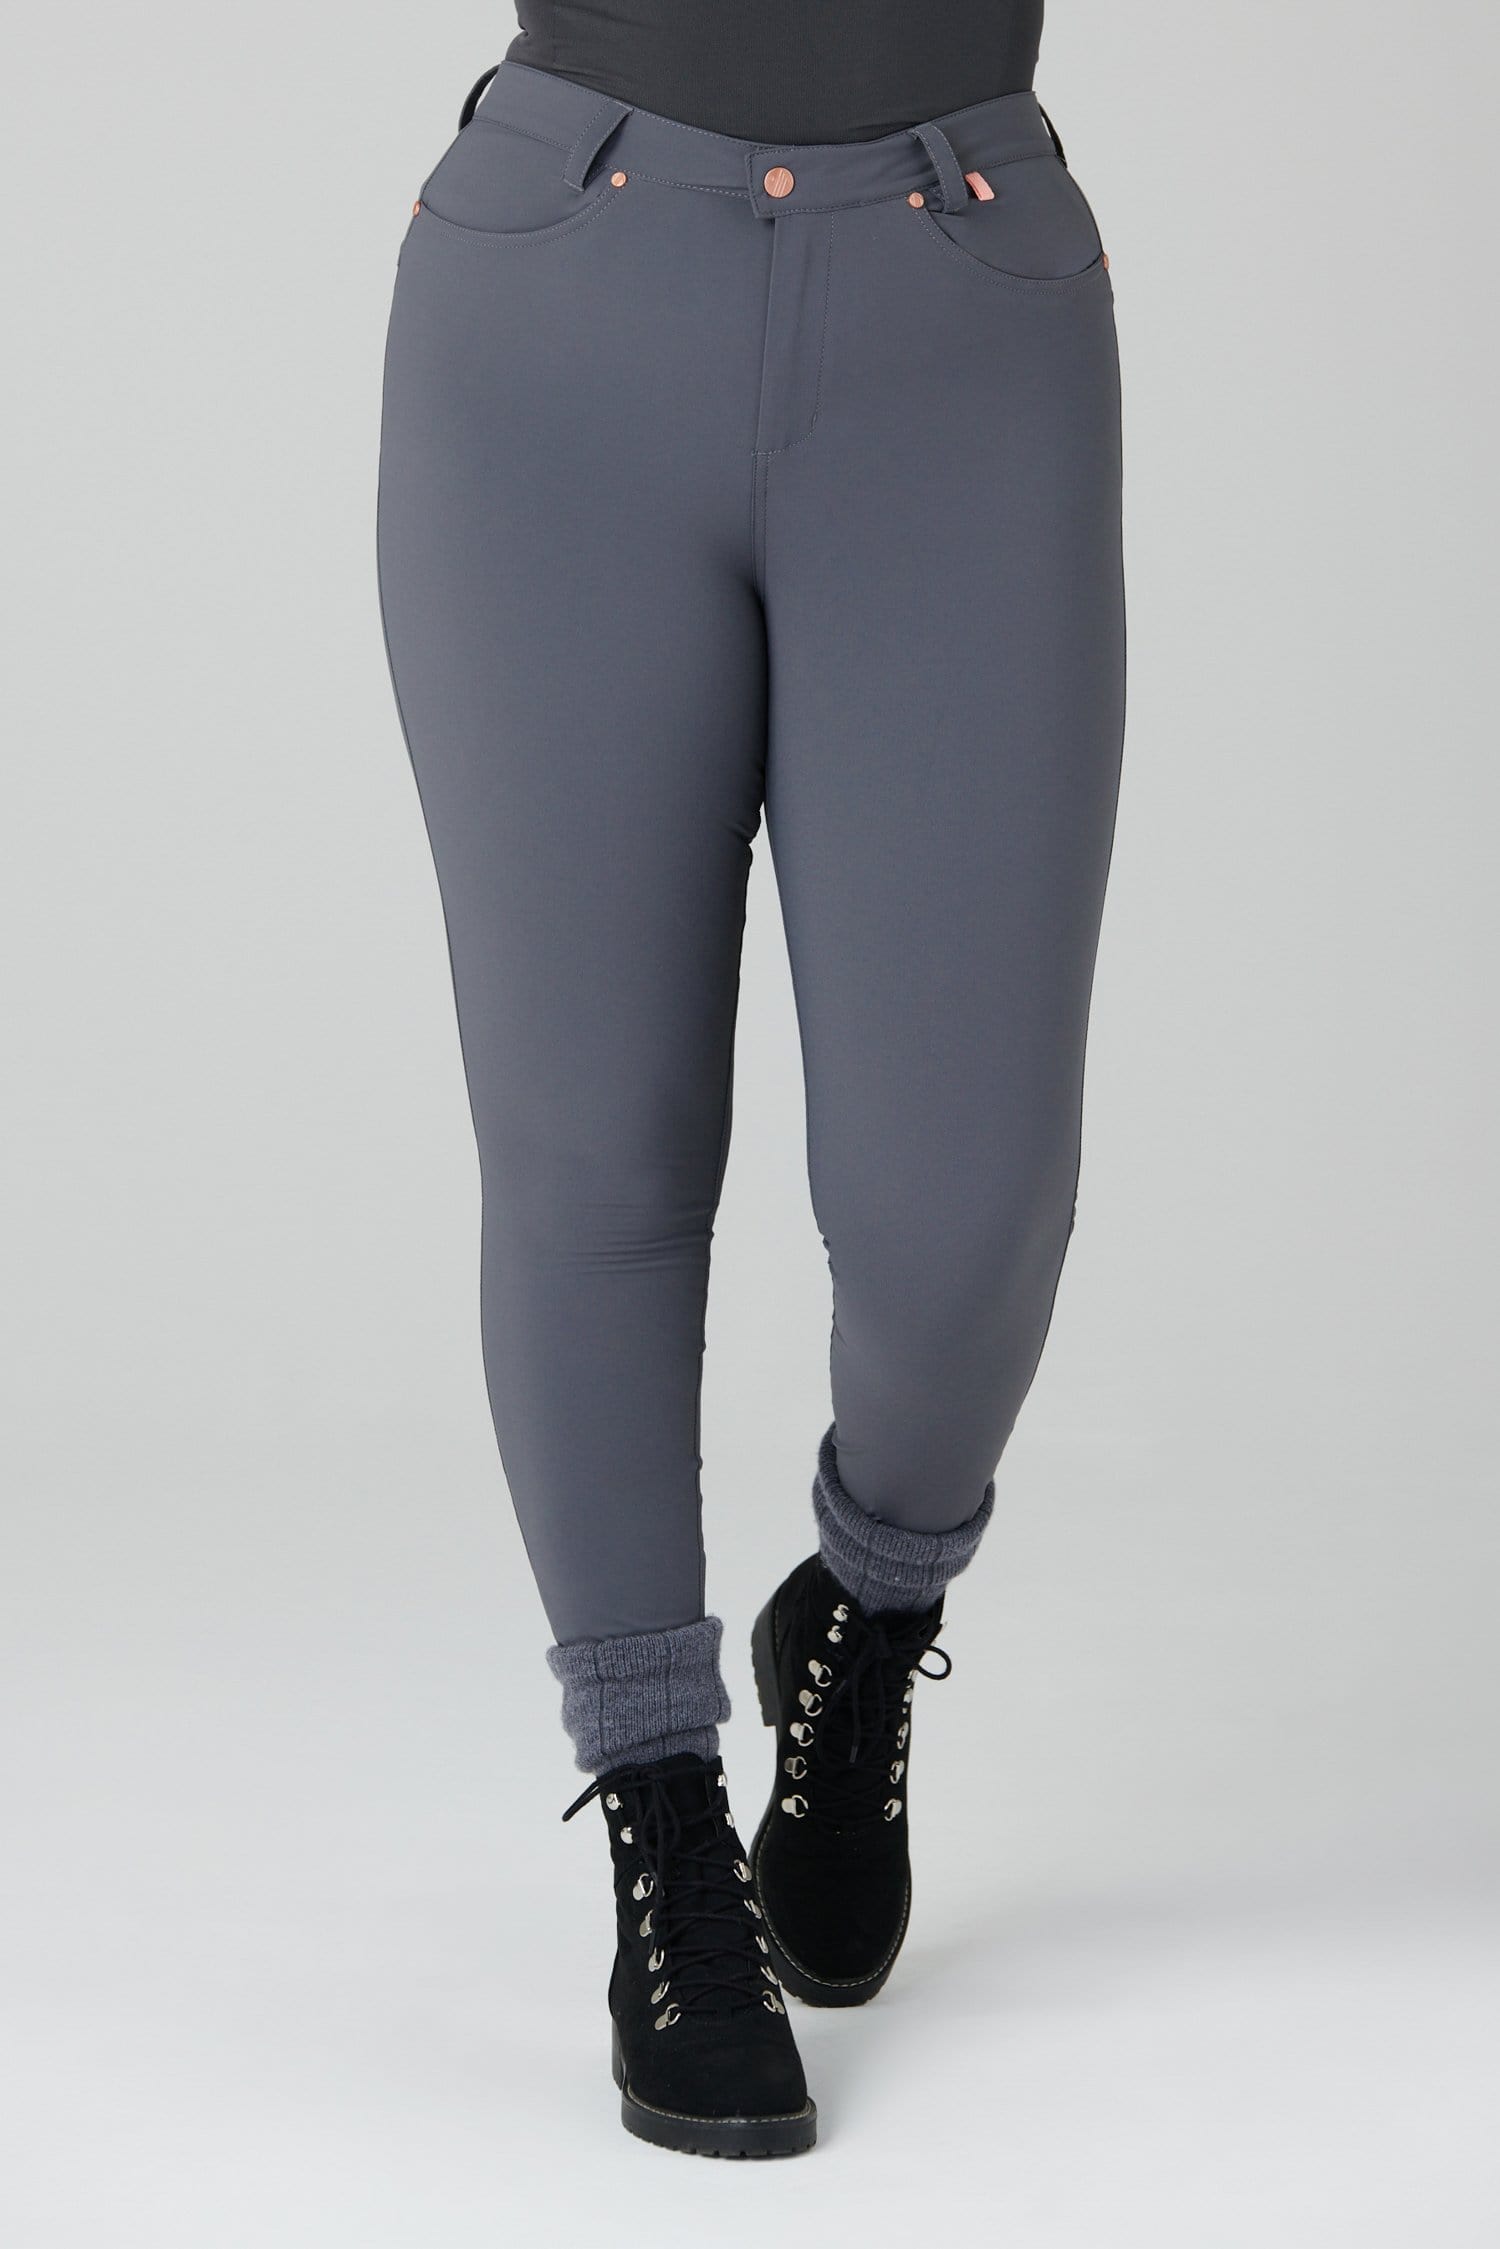 MAX Stretch Skinny Outdoor Trousers - Storm Grey Trousers  